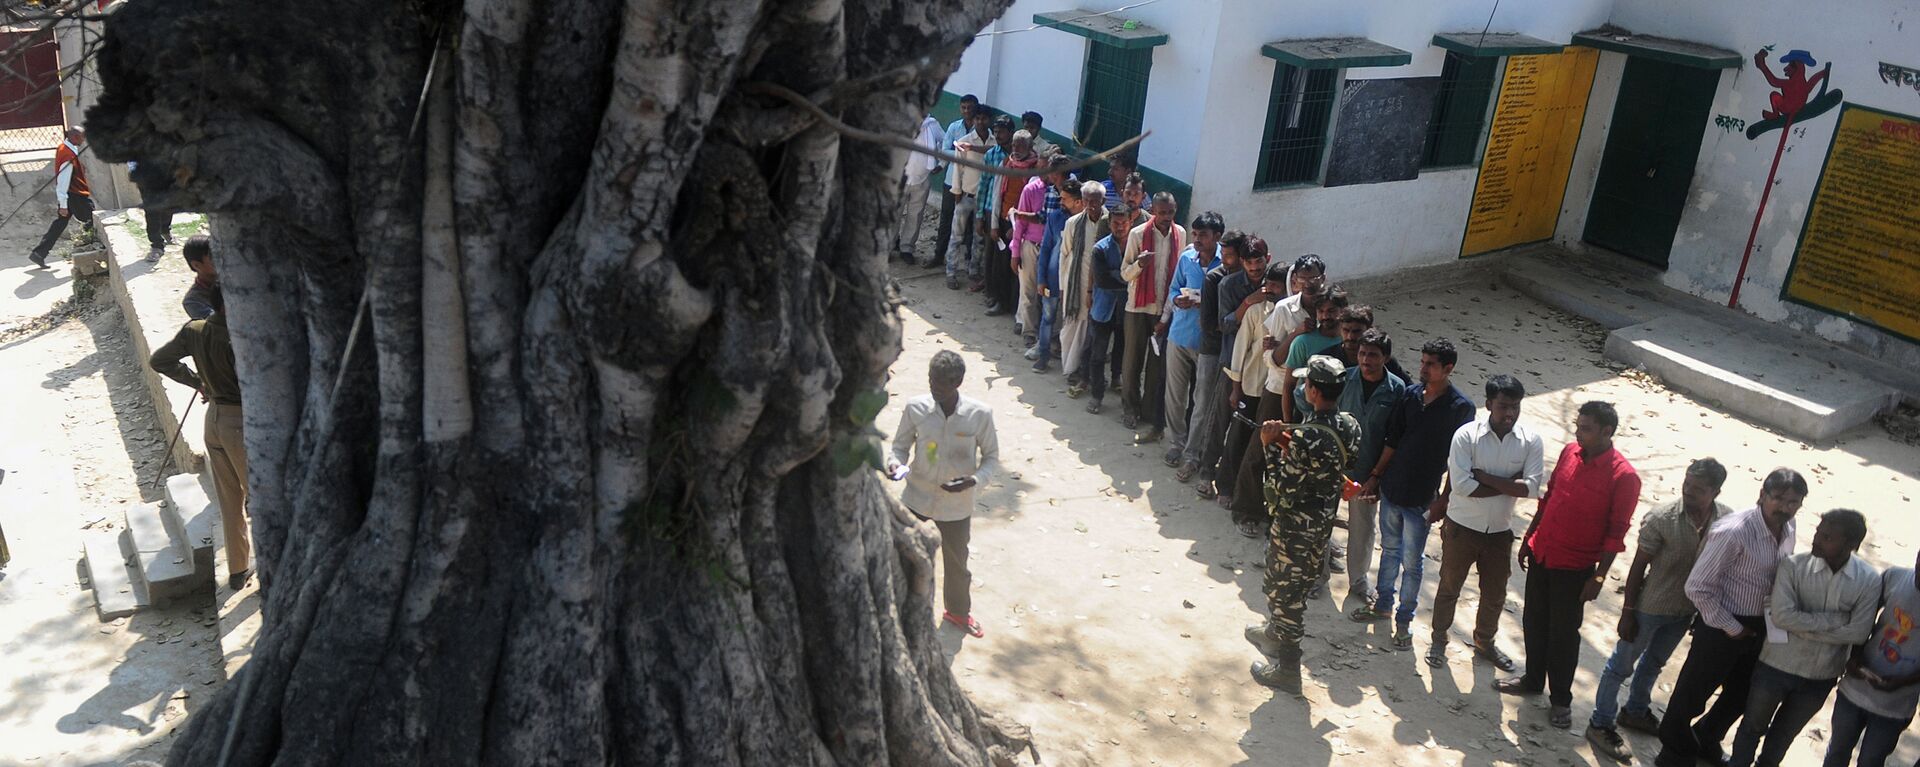 Indian voters wait in a queue for their turn to vote at a polling station in the Naini area on the outskirts of Allahabad during the fourth phase of Uttar Pradesh state assembly elections on February 23, 2017 - Sputnik International, 1920, 23.07.2021